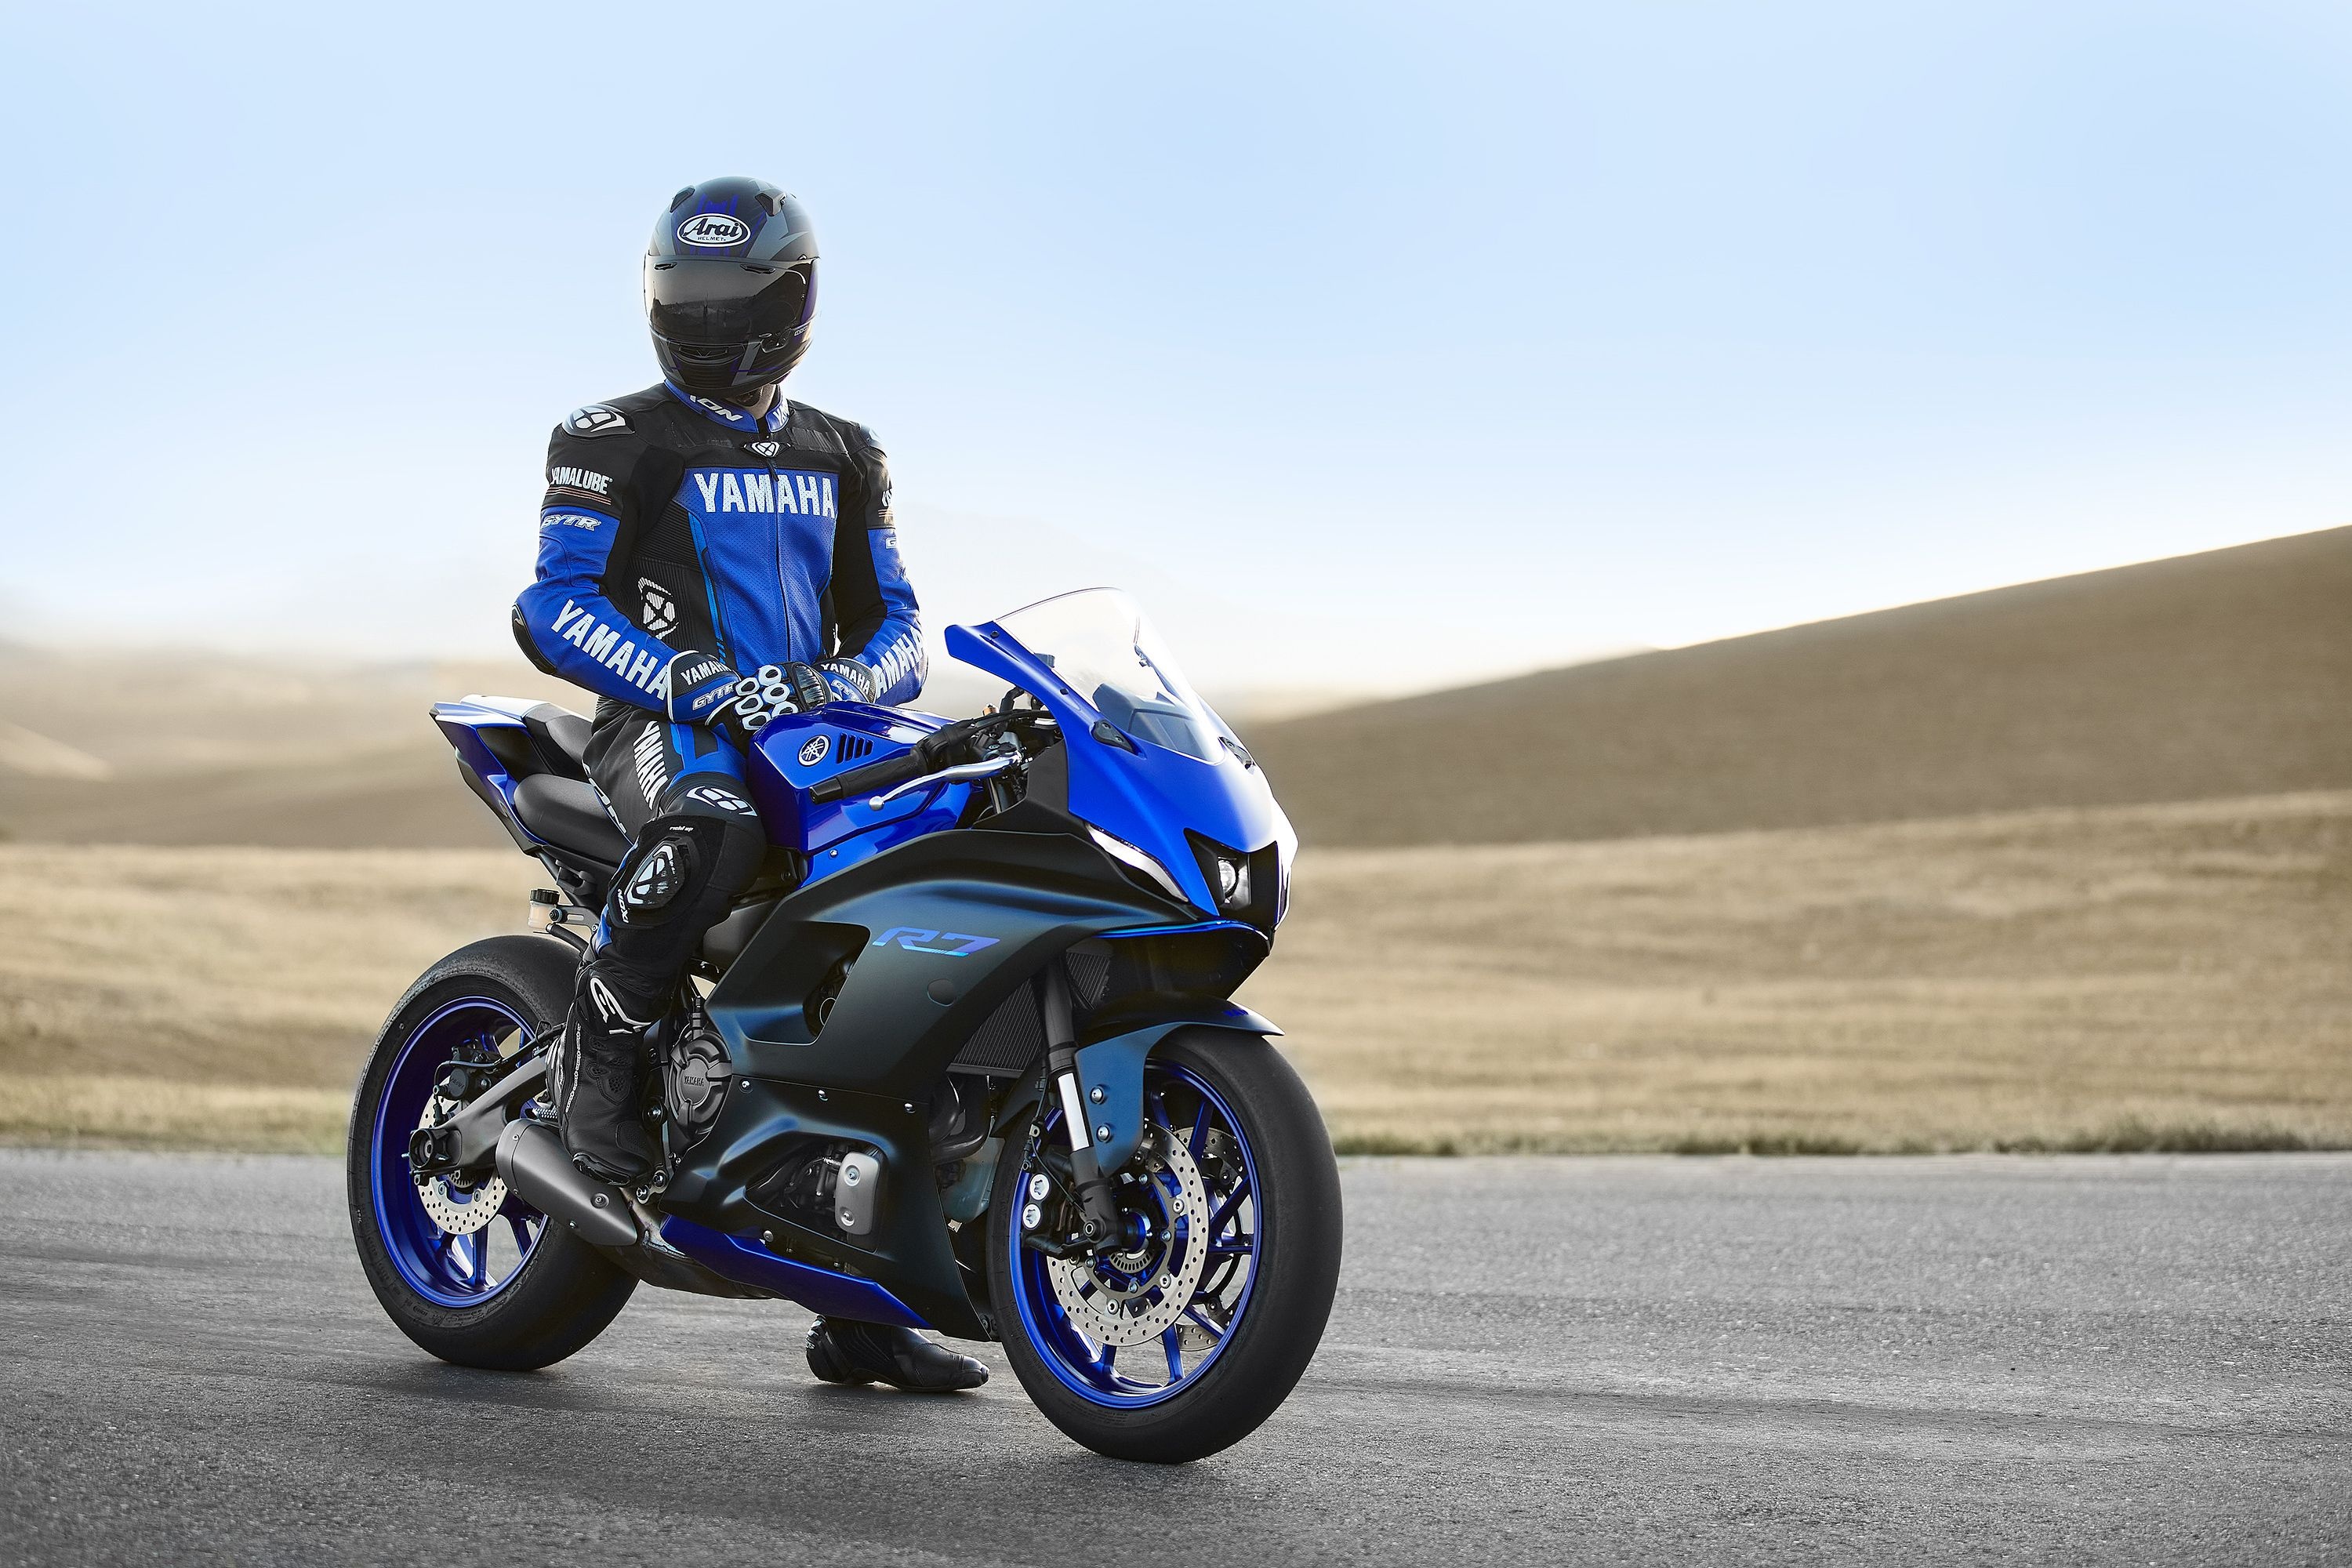 Yamaha YZFR7 Wallpapers (29+ images inside)